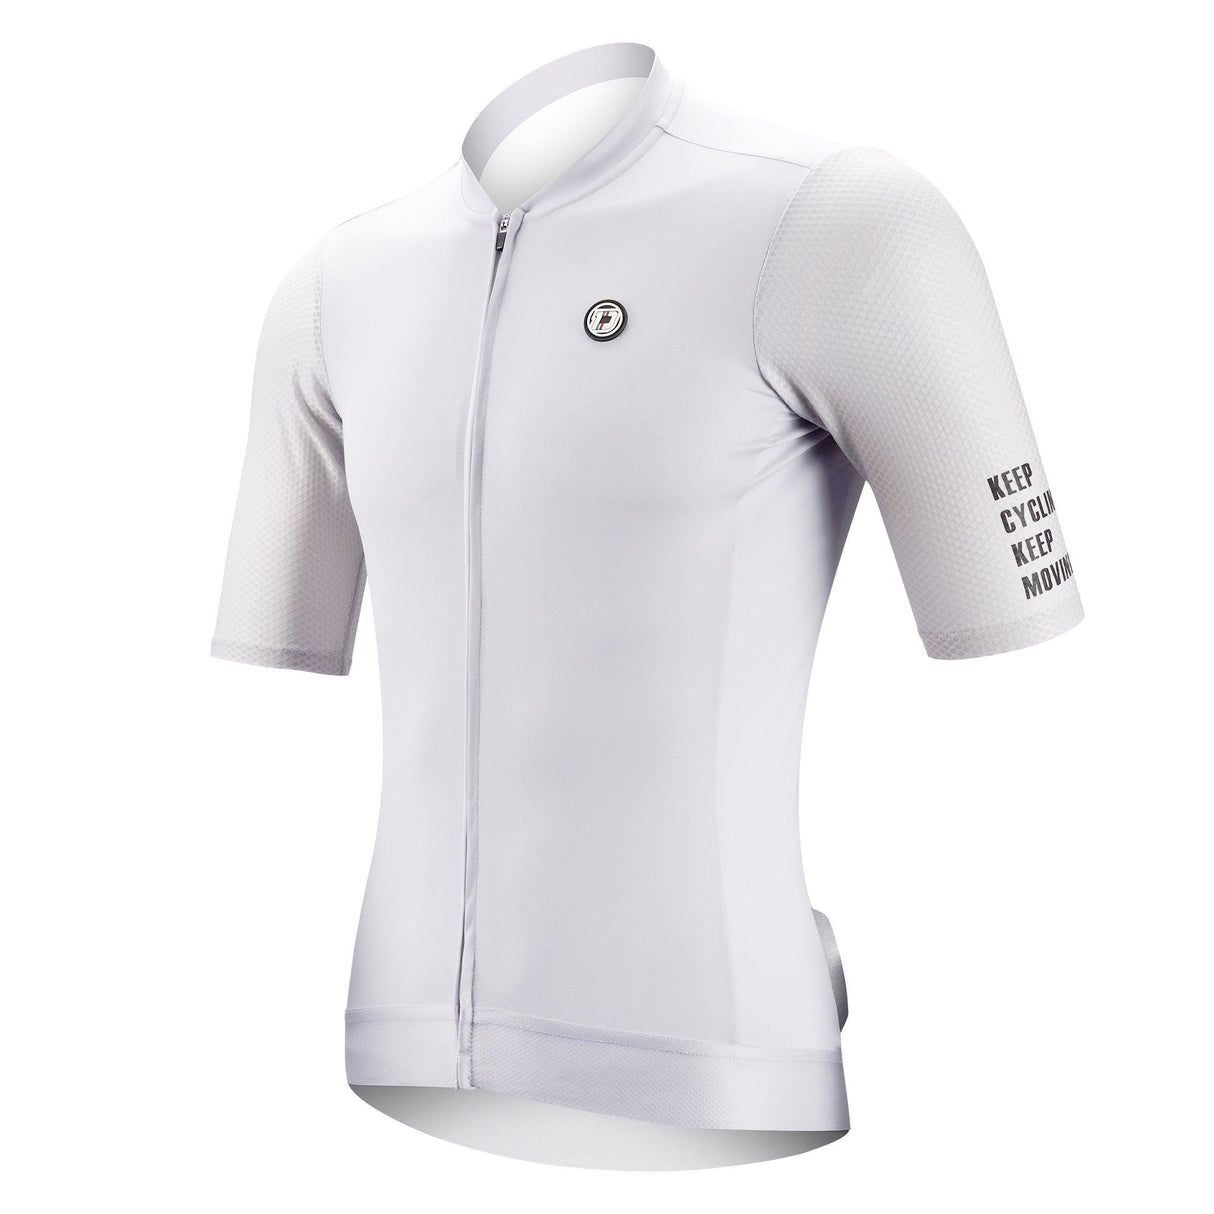 LIFTTINT 1.X CYCLING JERSEY-Withe-Side- Darevie Shop